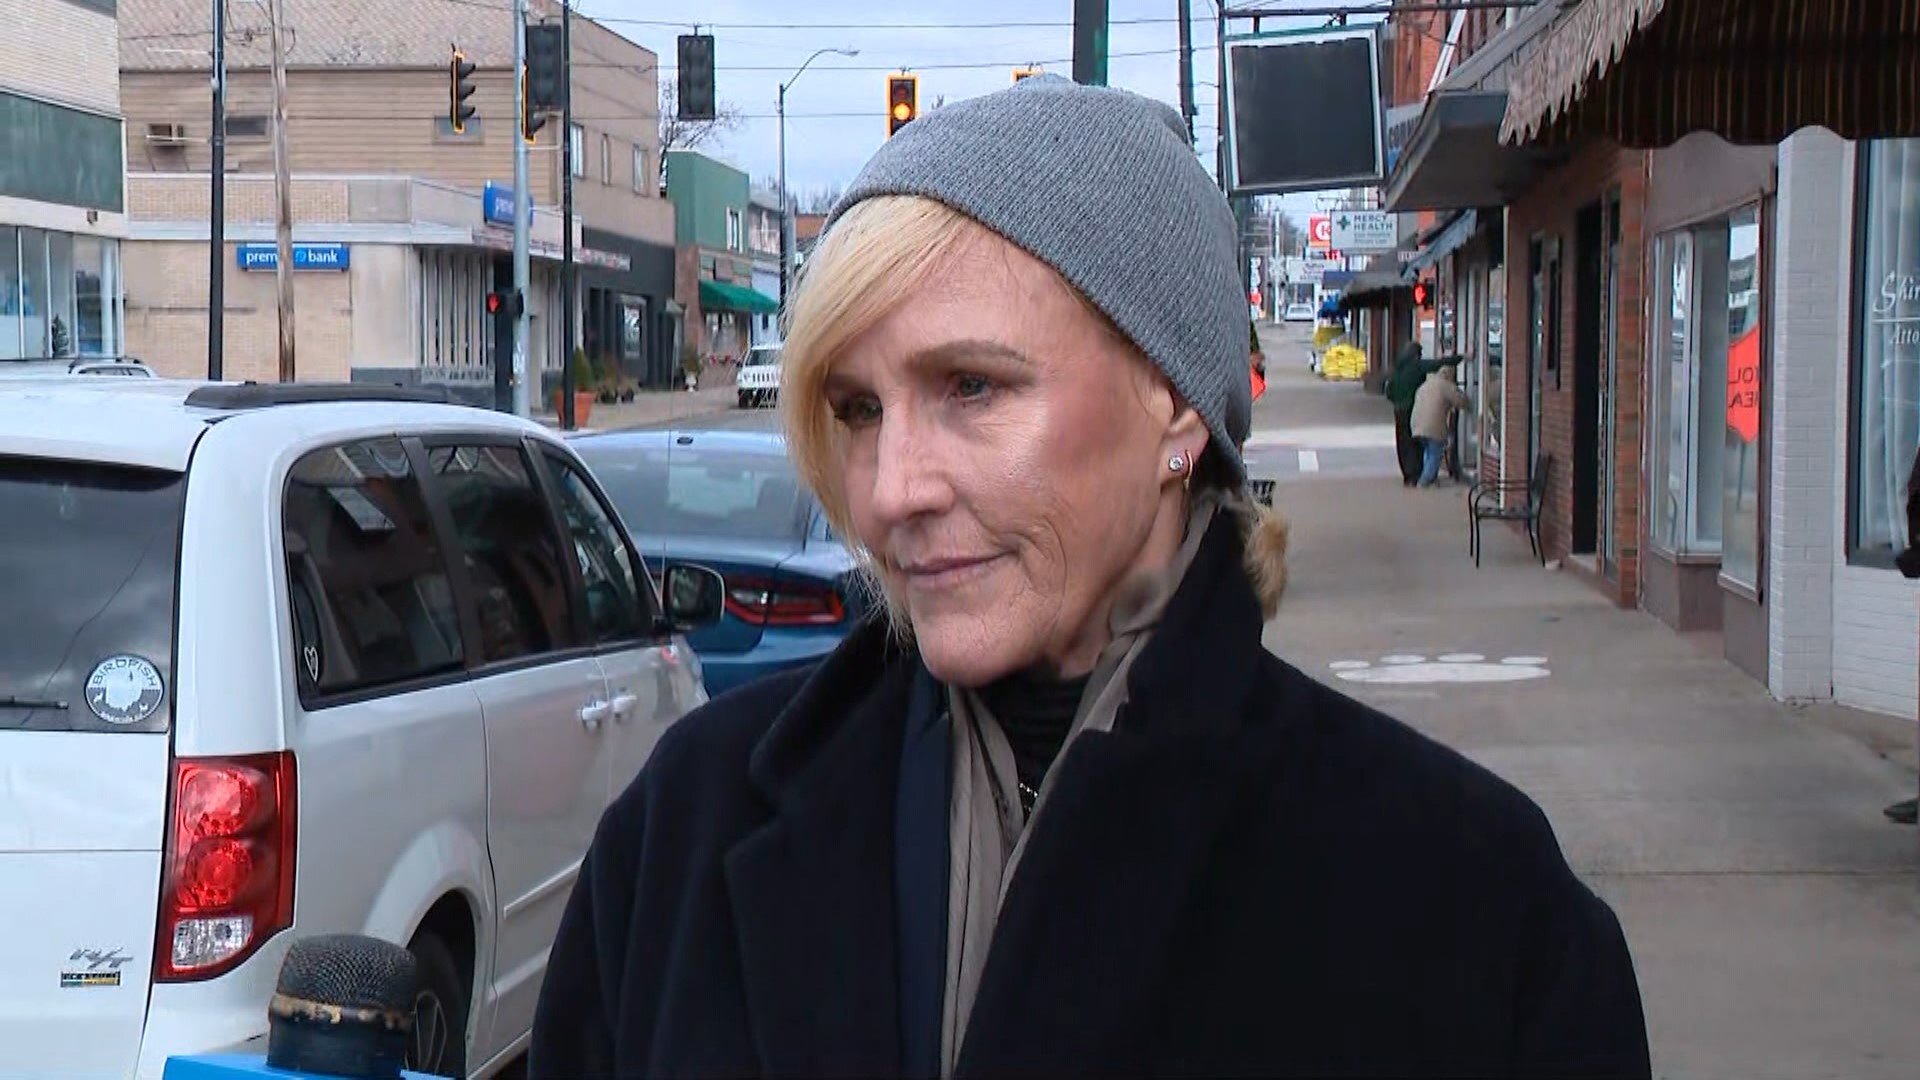 Activist Erin Brockovich says she is upset after speaking with residents in East Palestine.